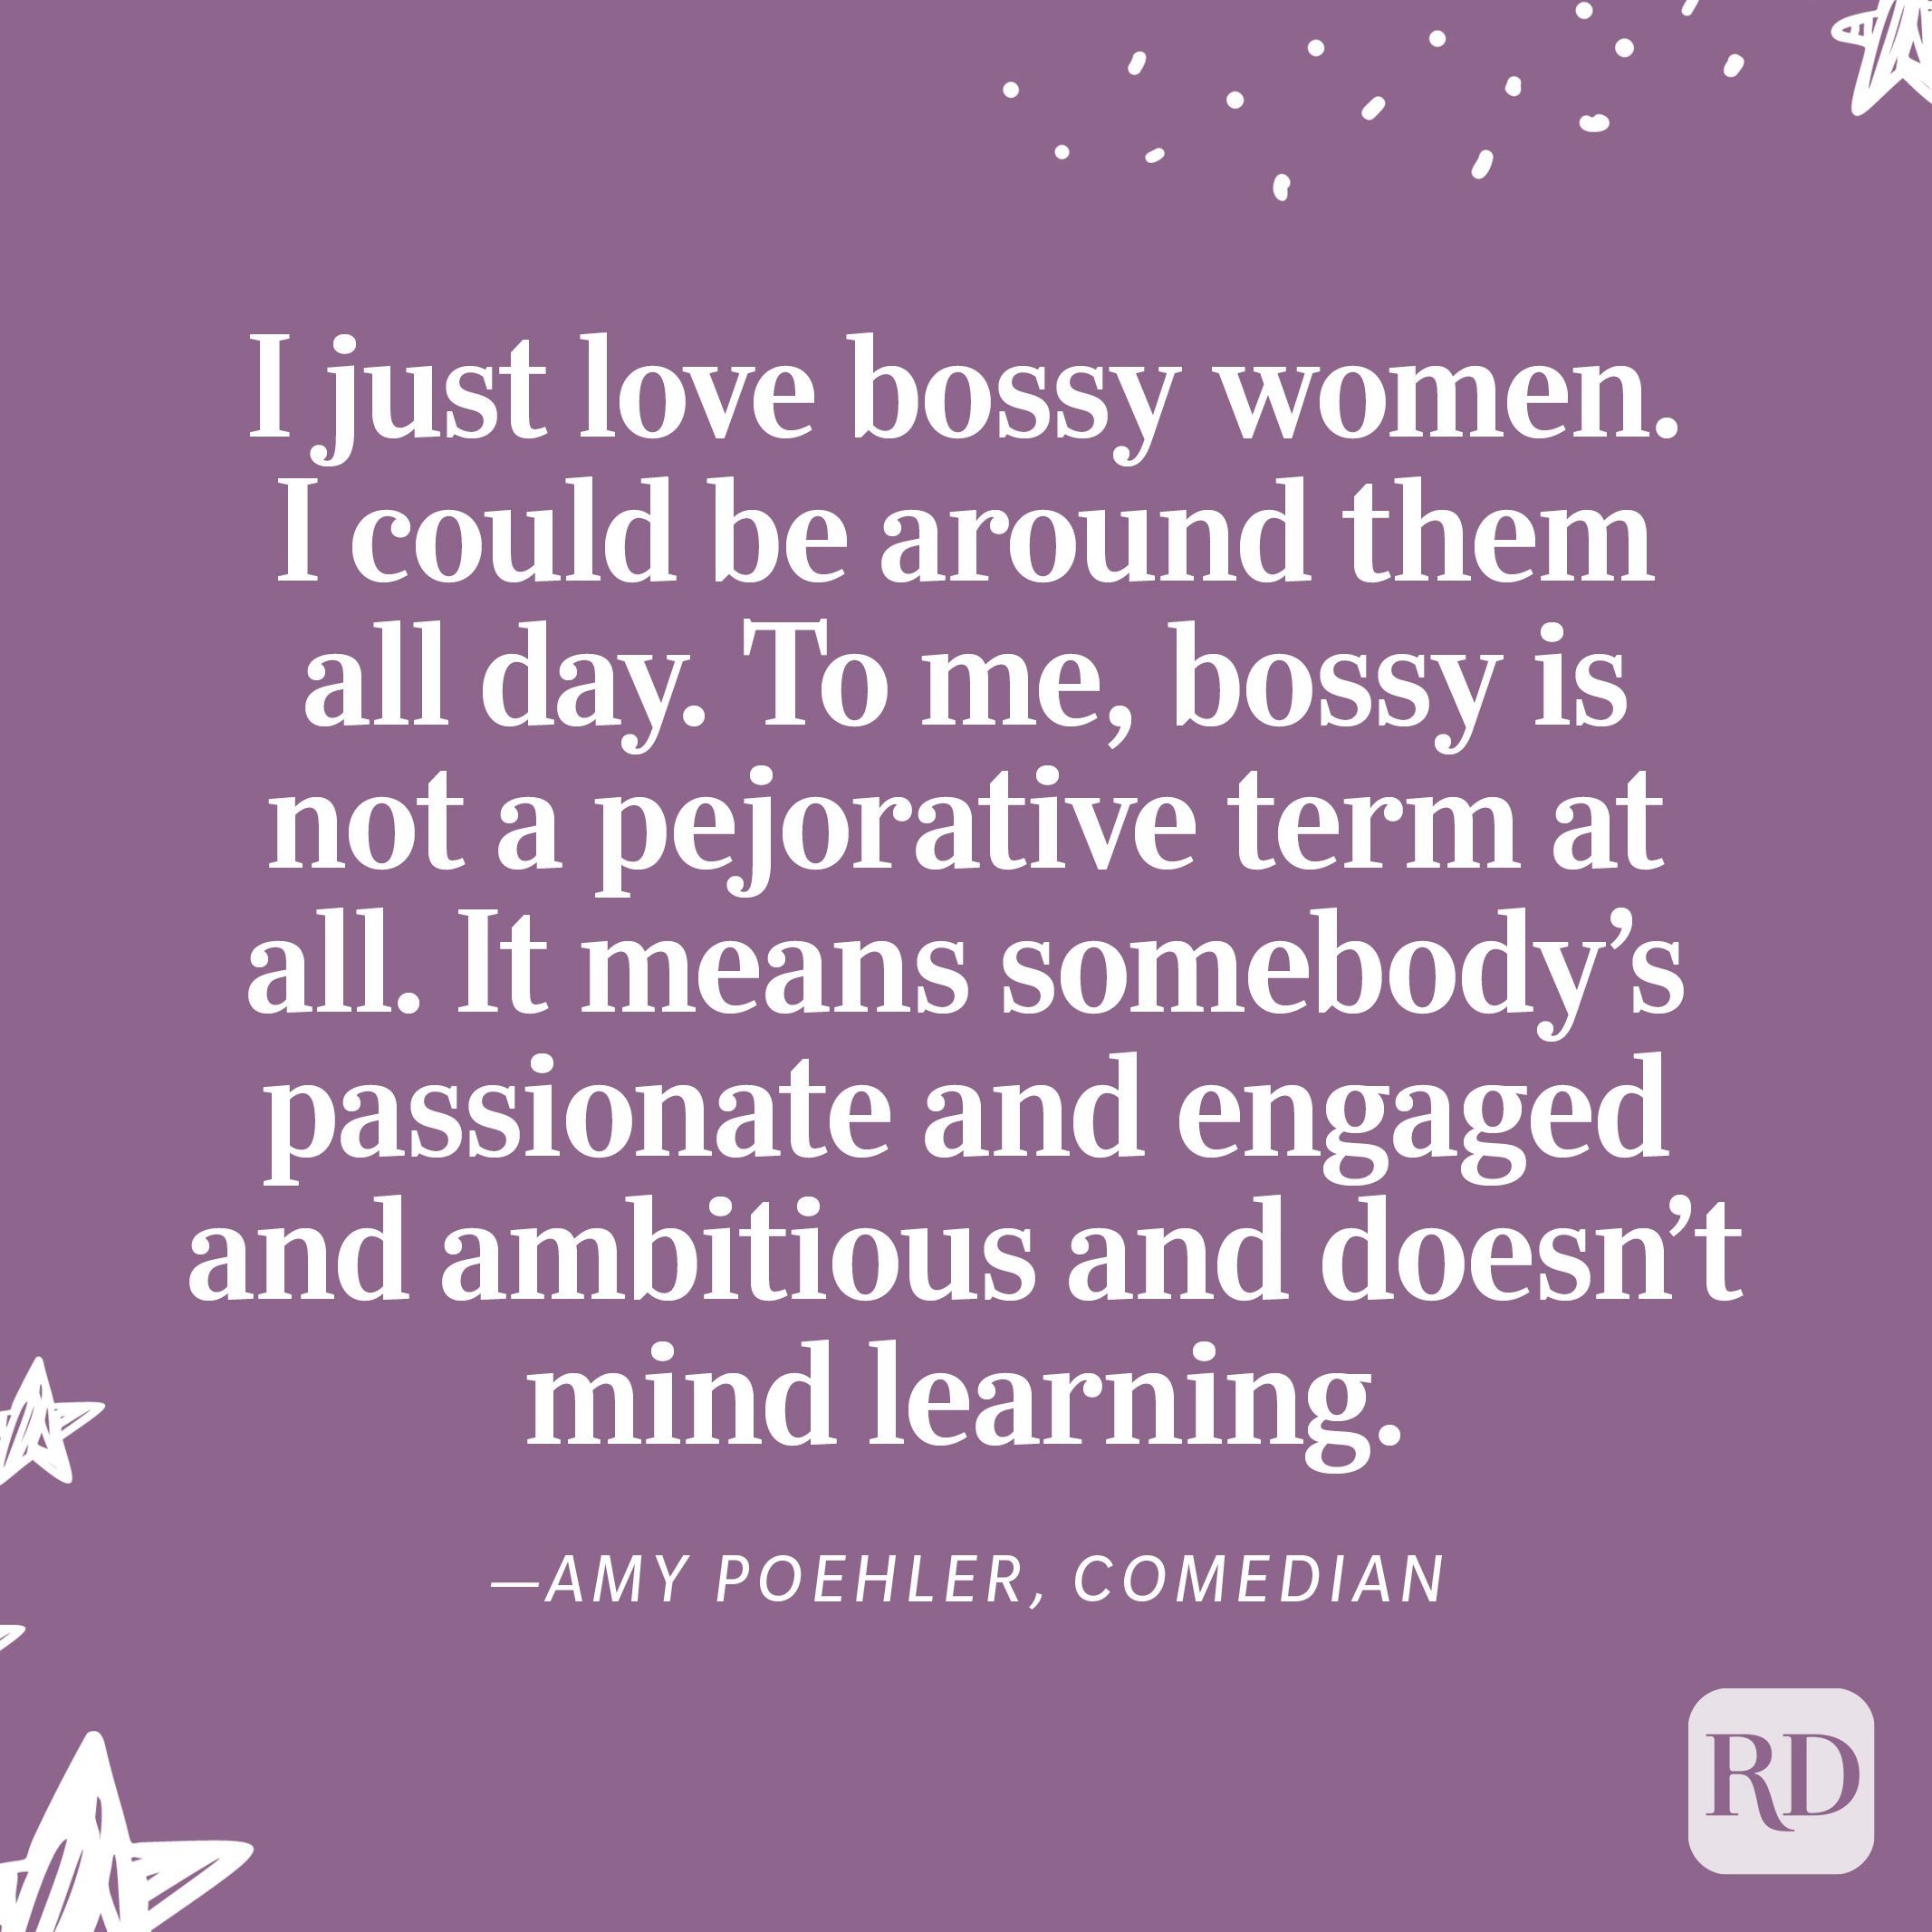 ambitious quotes for women